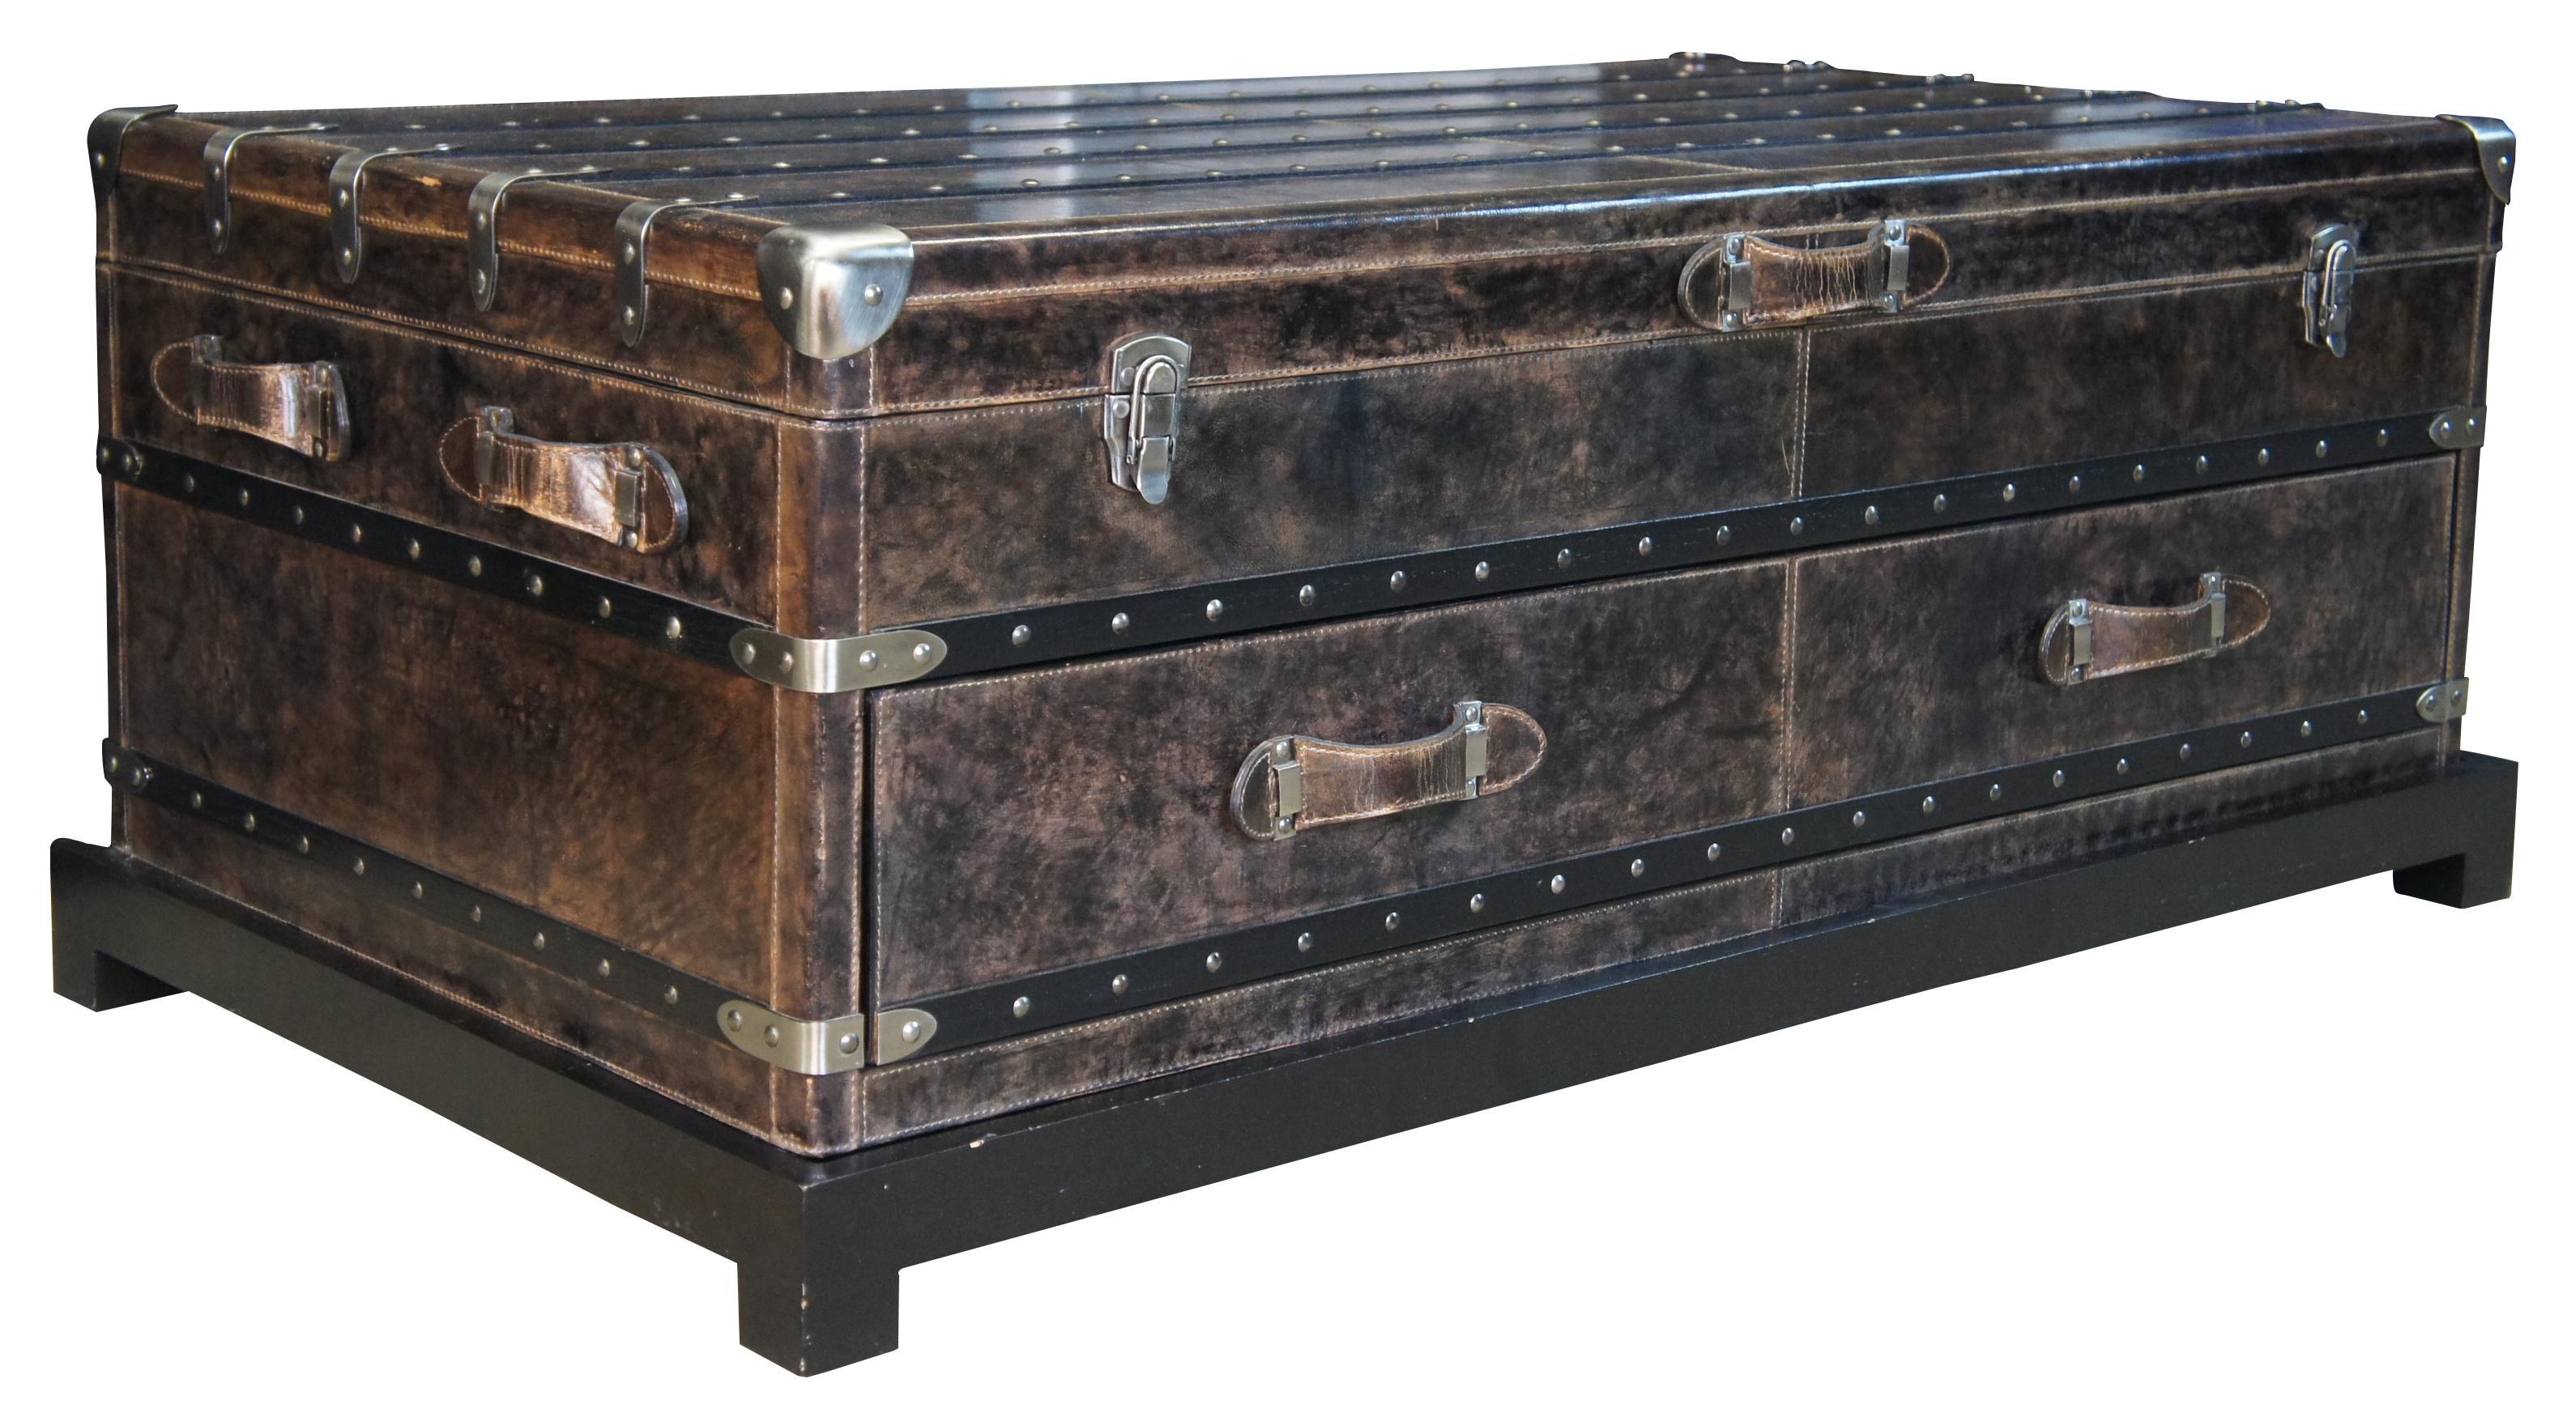 The Arhaus Martin coffee table is a stunning modern rendition of Victorian era steamer trunks. Beautiful brown leather with nickel riveted wooden trim. Includes one over sized drawer and a top compartment for accessory storage. Rests upon a